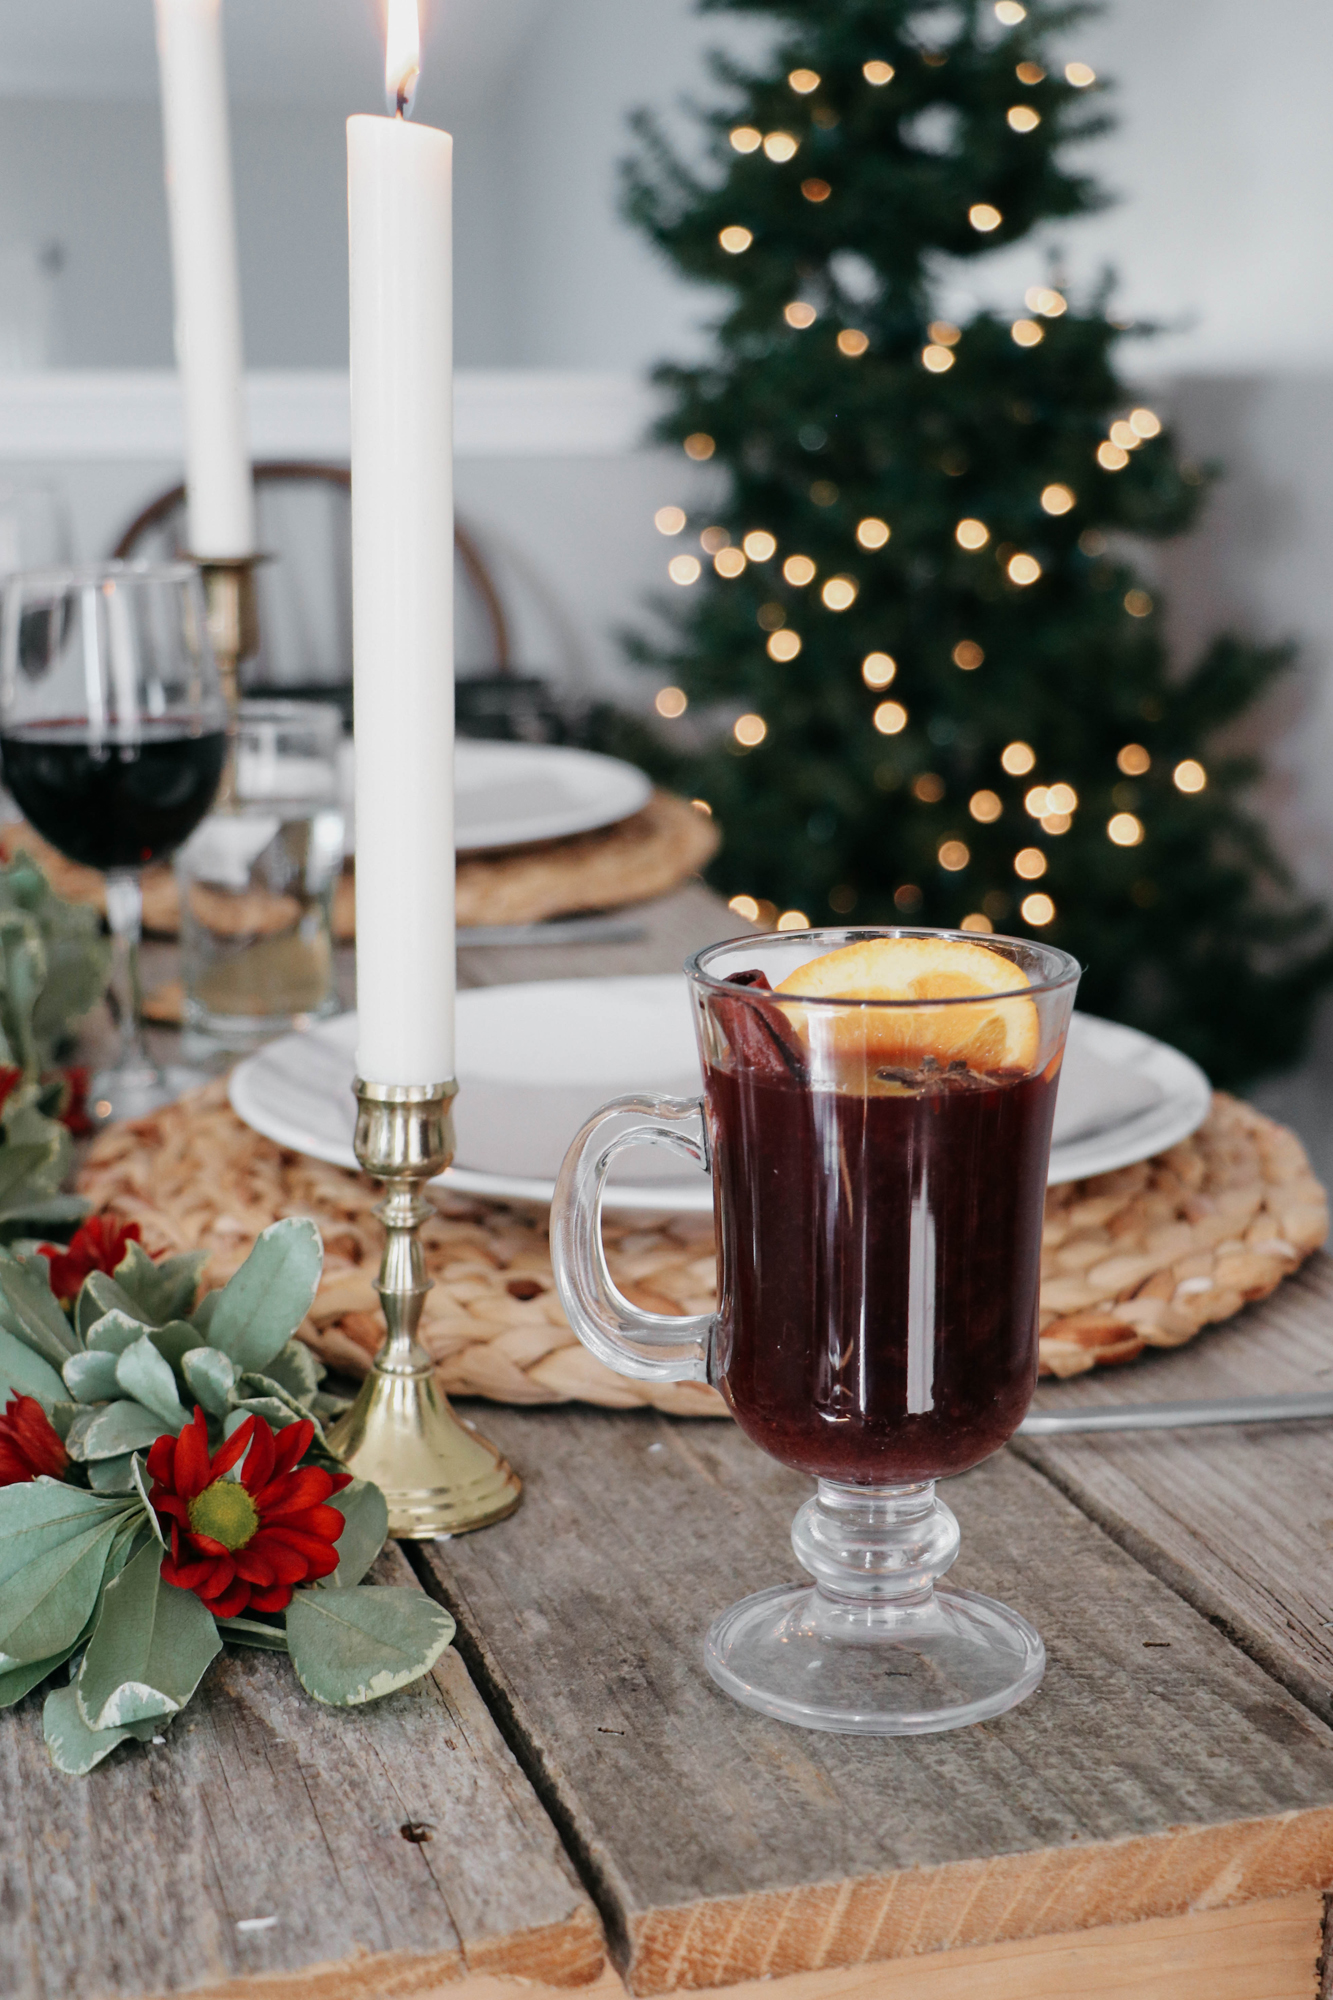 Simple Mulled Wine Recipe / How to Make Mulled Wine / Ideas for Christmas Party / theanastasiaco.com @theanastasiaco